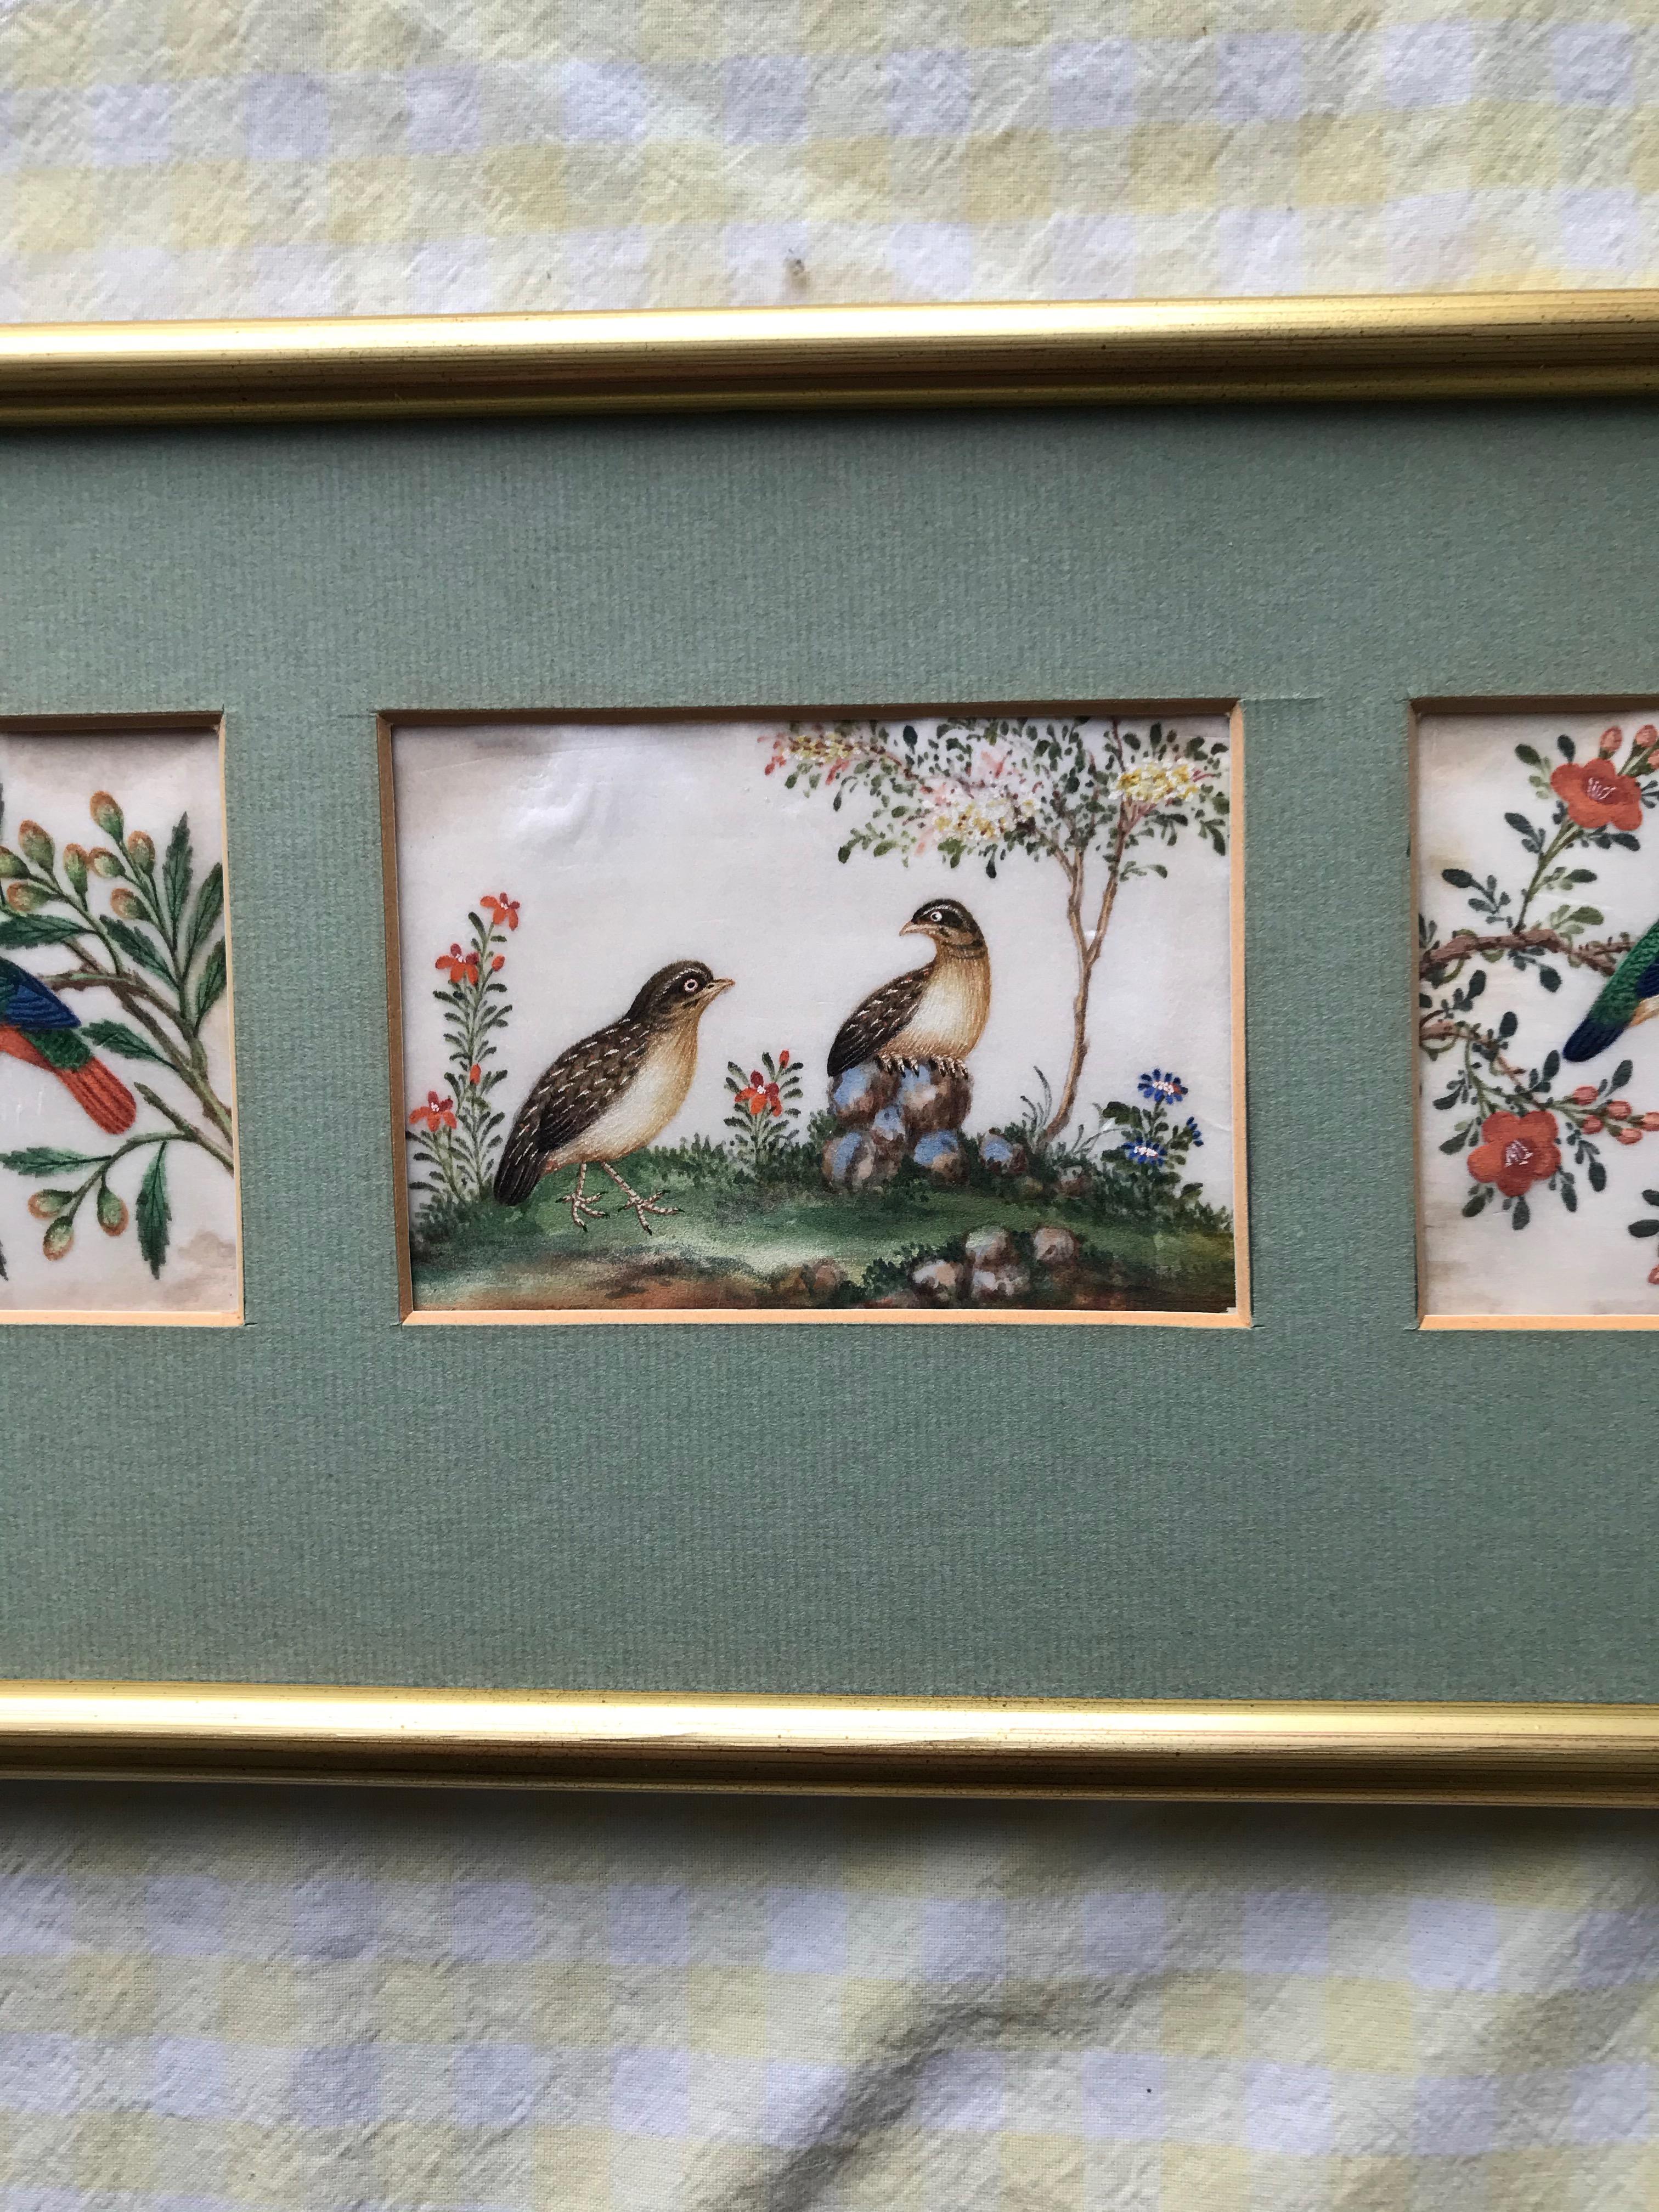 A charming trio of 19th century watercolors on pith (rice) paper of exotic birds. With lovely colour and detailing.

Each image measures approximately 2.75 x 4 inches and are attractively presented within a gilt frame. Three pictures framed as